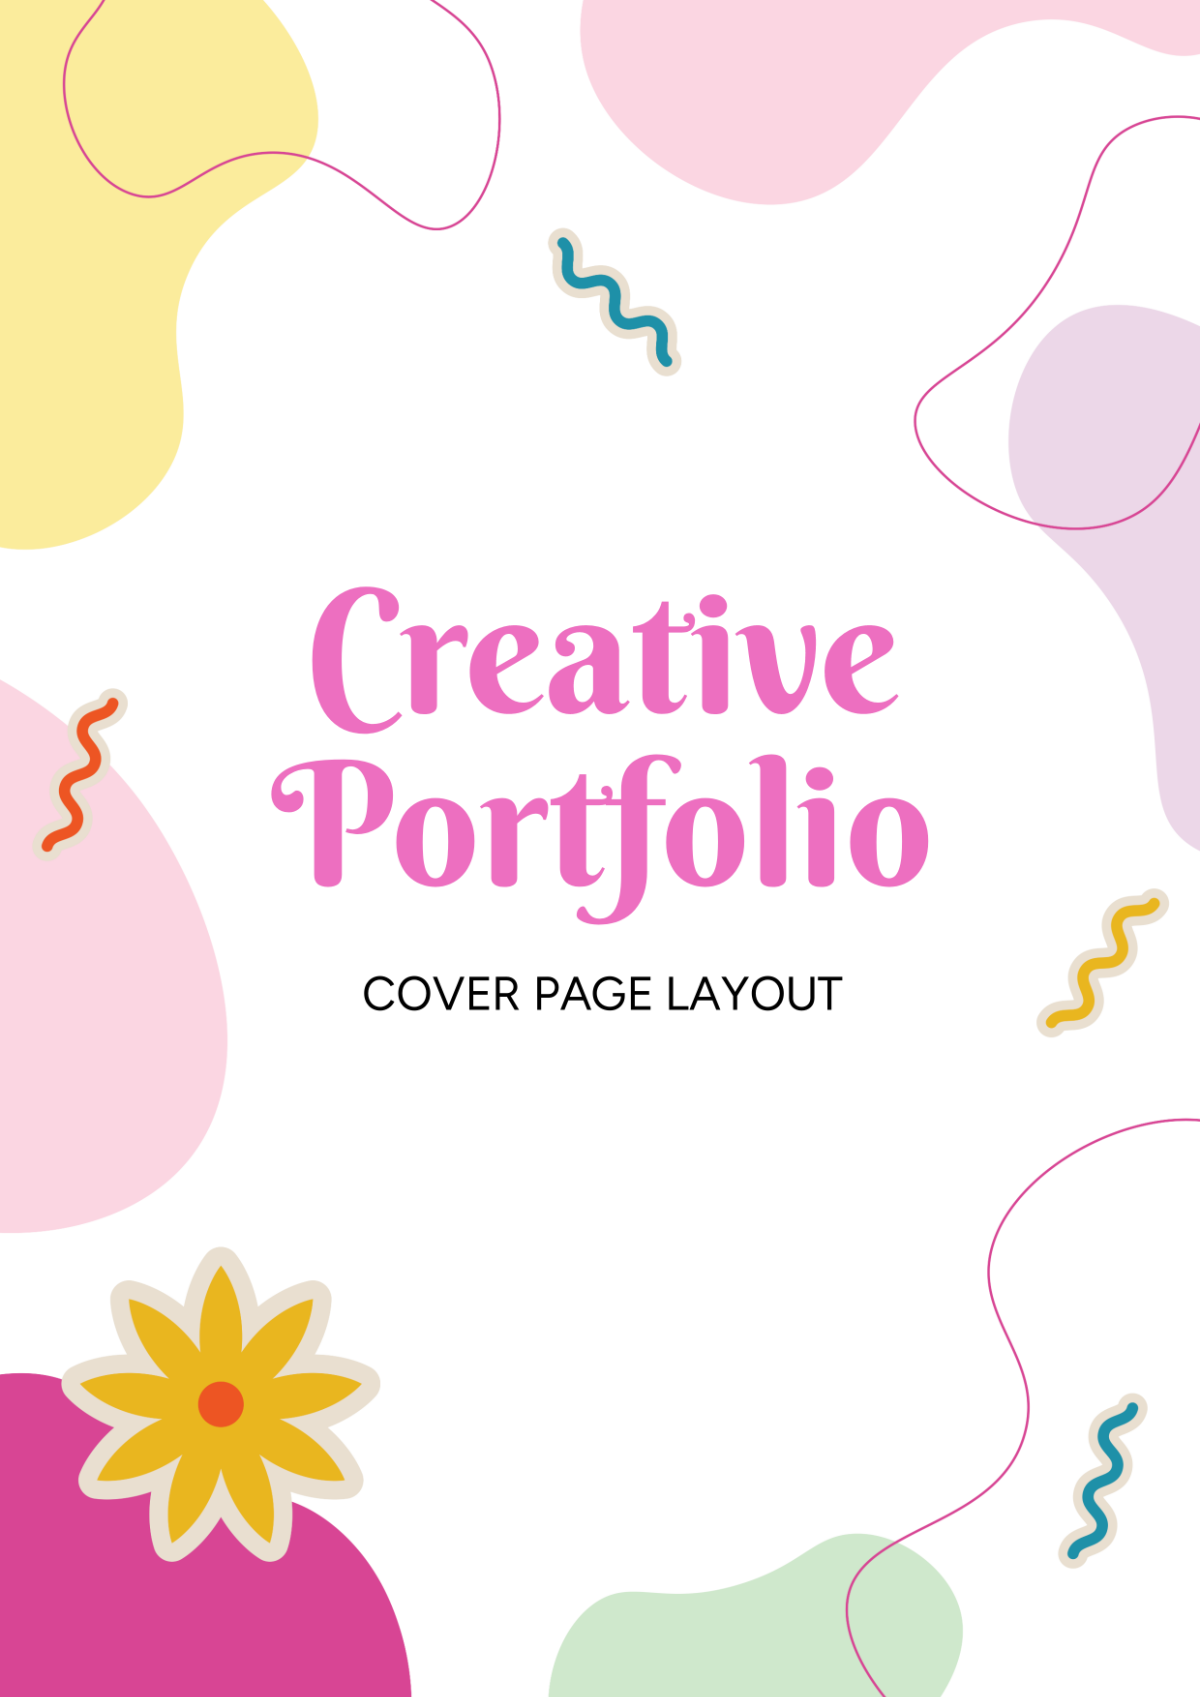 Creative Portfolio Cover Page Layout Template